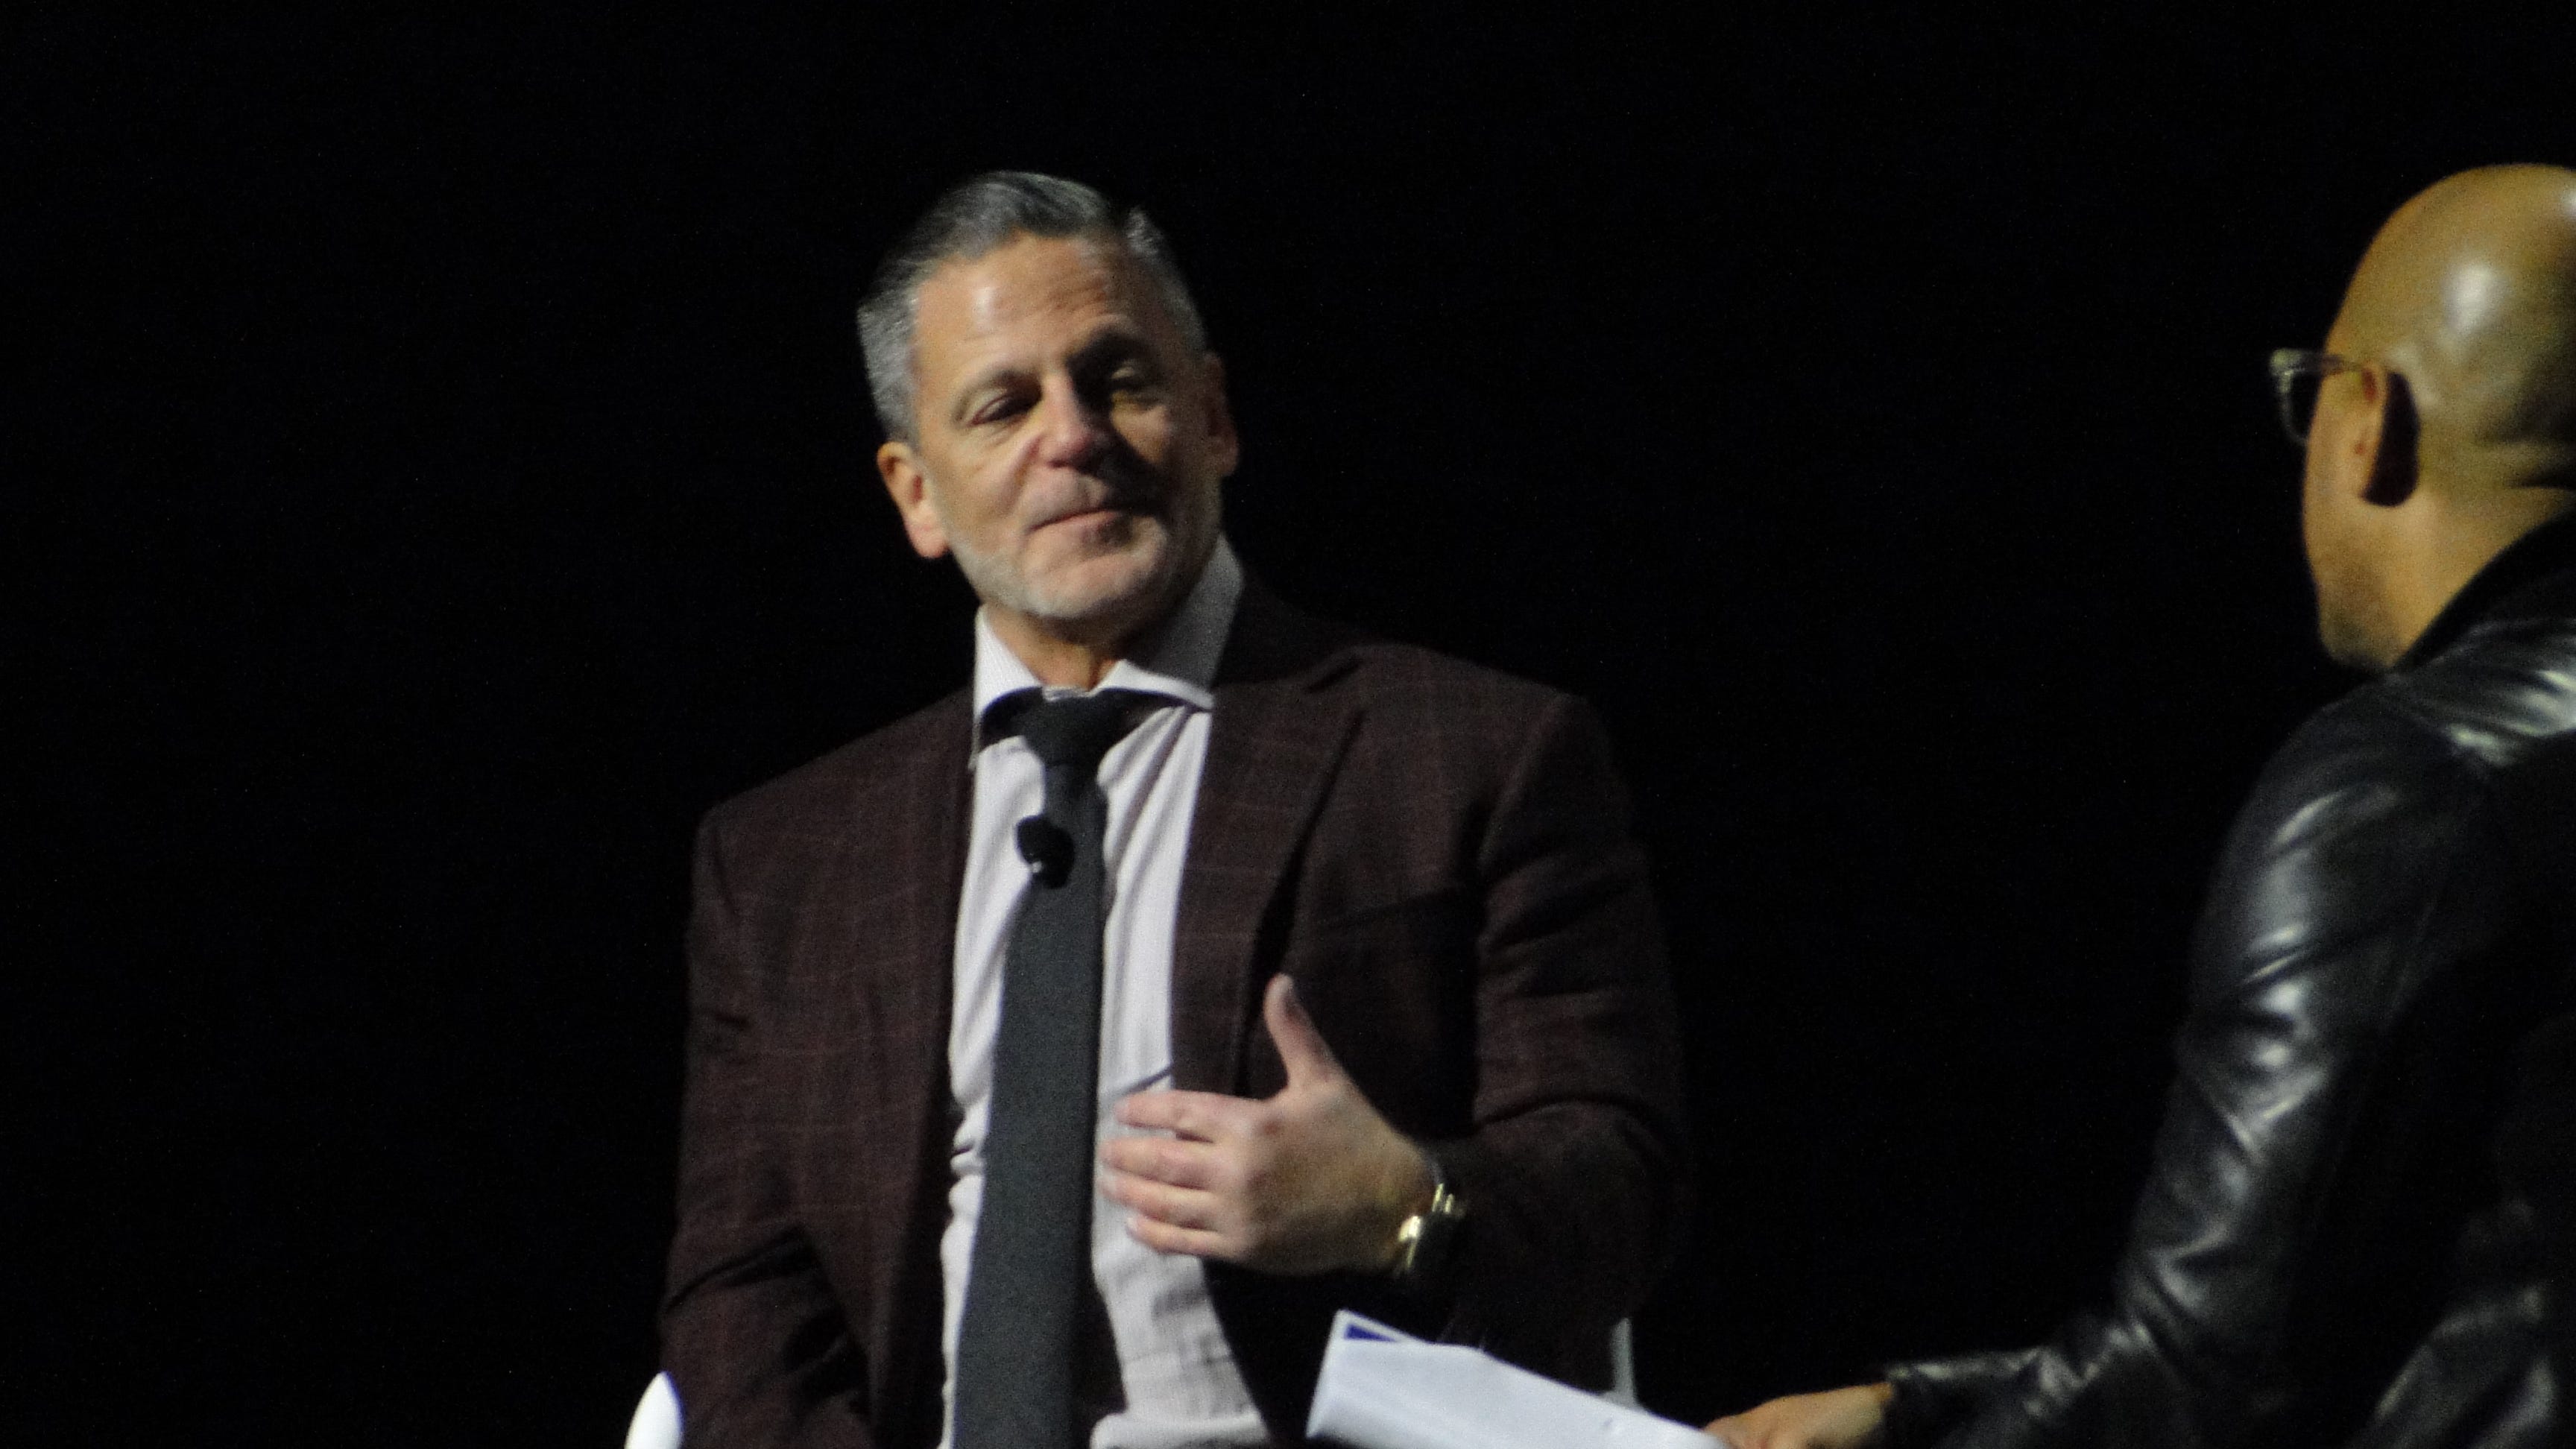 Quicken Loans founder and chairman Dan Gilbert speaks with Dennis Archer Jr., CEO of Ignition Media Group, at the Detroit Regional Chamber's Detroit Policy Conference.